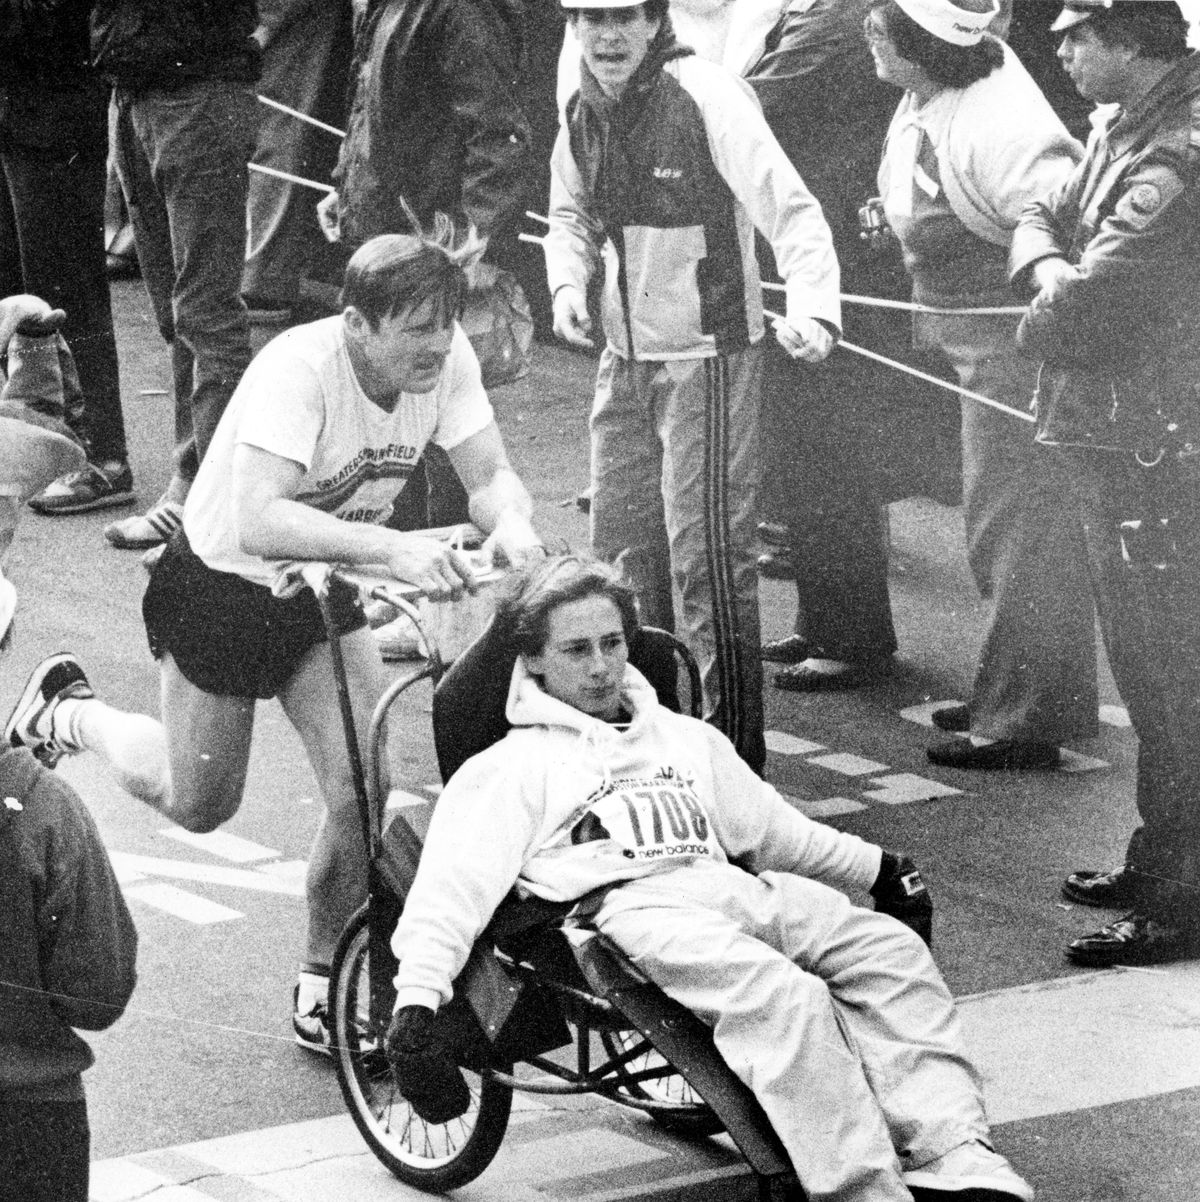 boston, ma april 18 richard e hoyt jr is pushed across the finish line by his father richard as they complete the 87th boston marathon, april 18, 1983 photo by bill ryersonthe boston globe via getty images